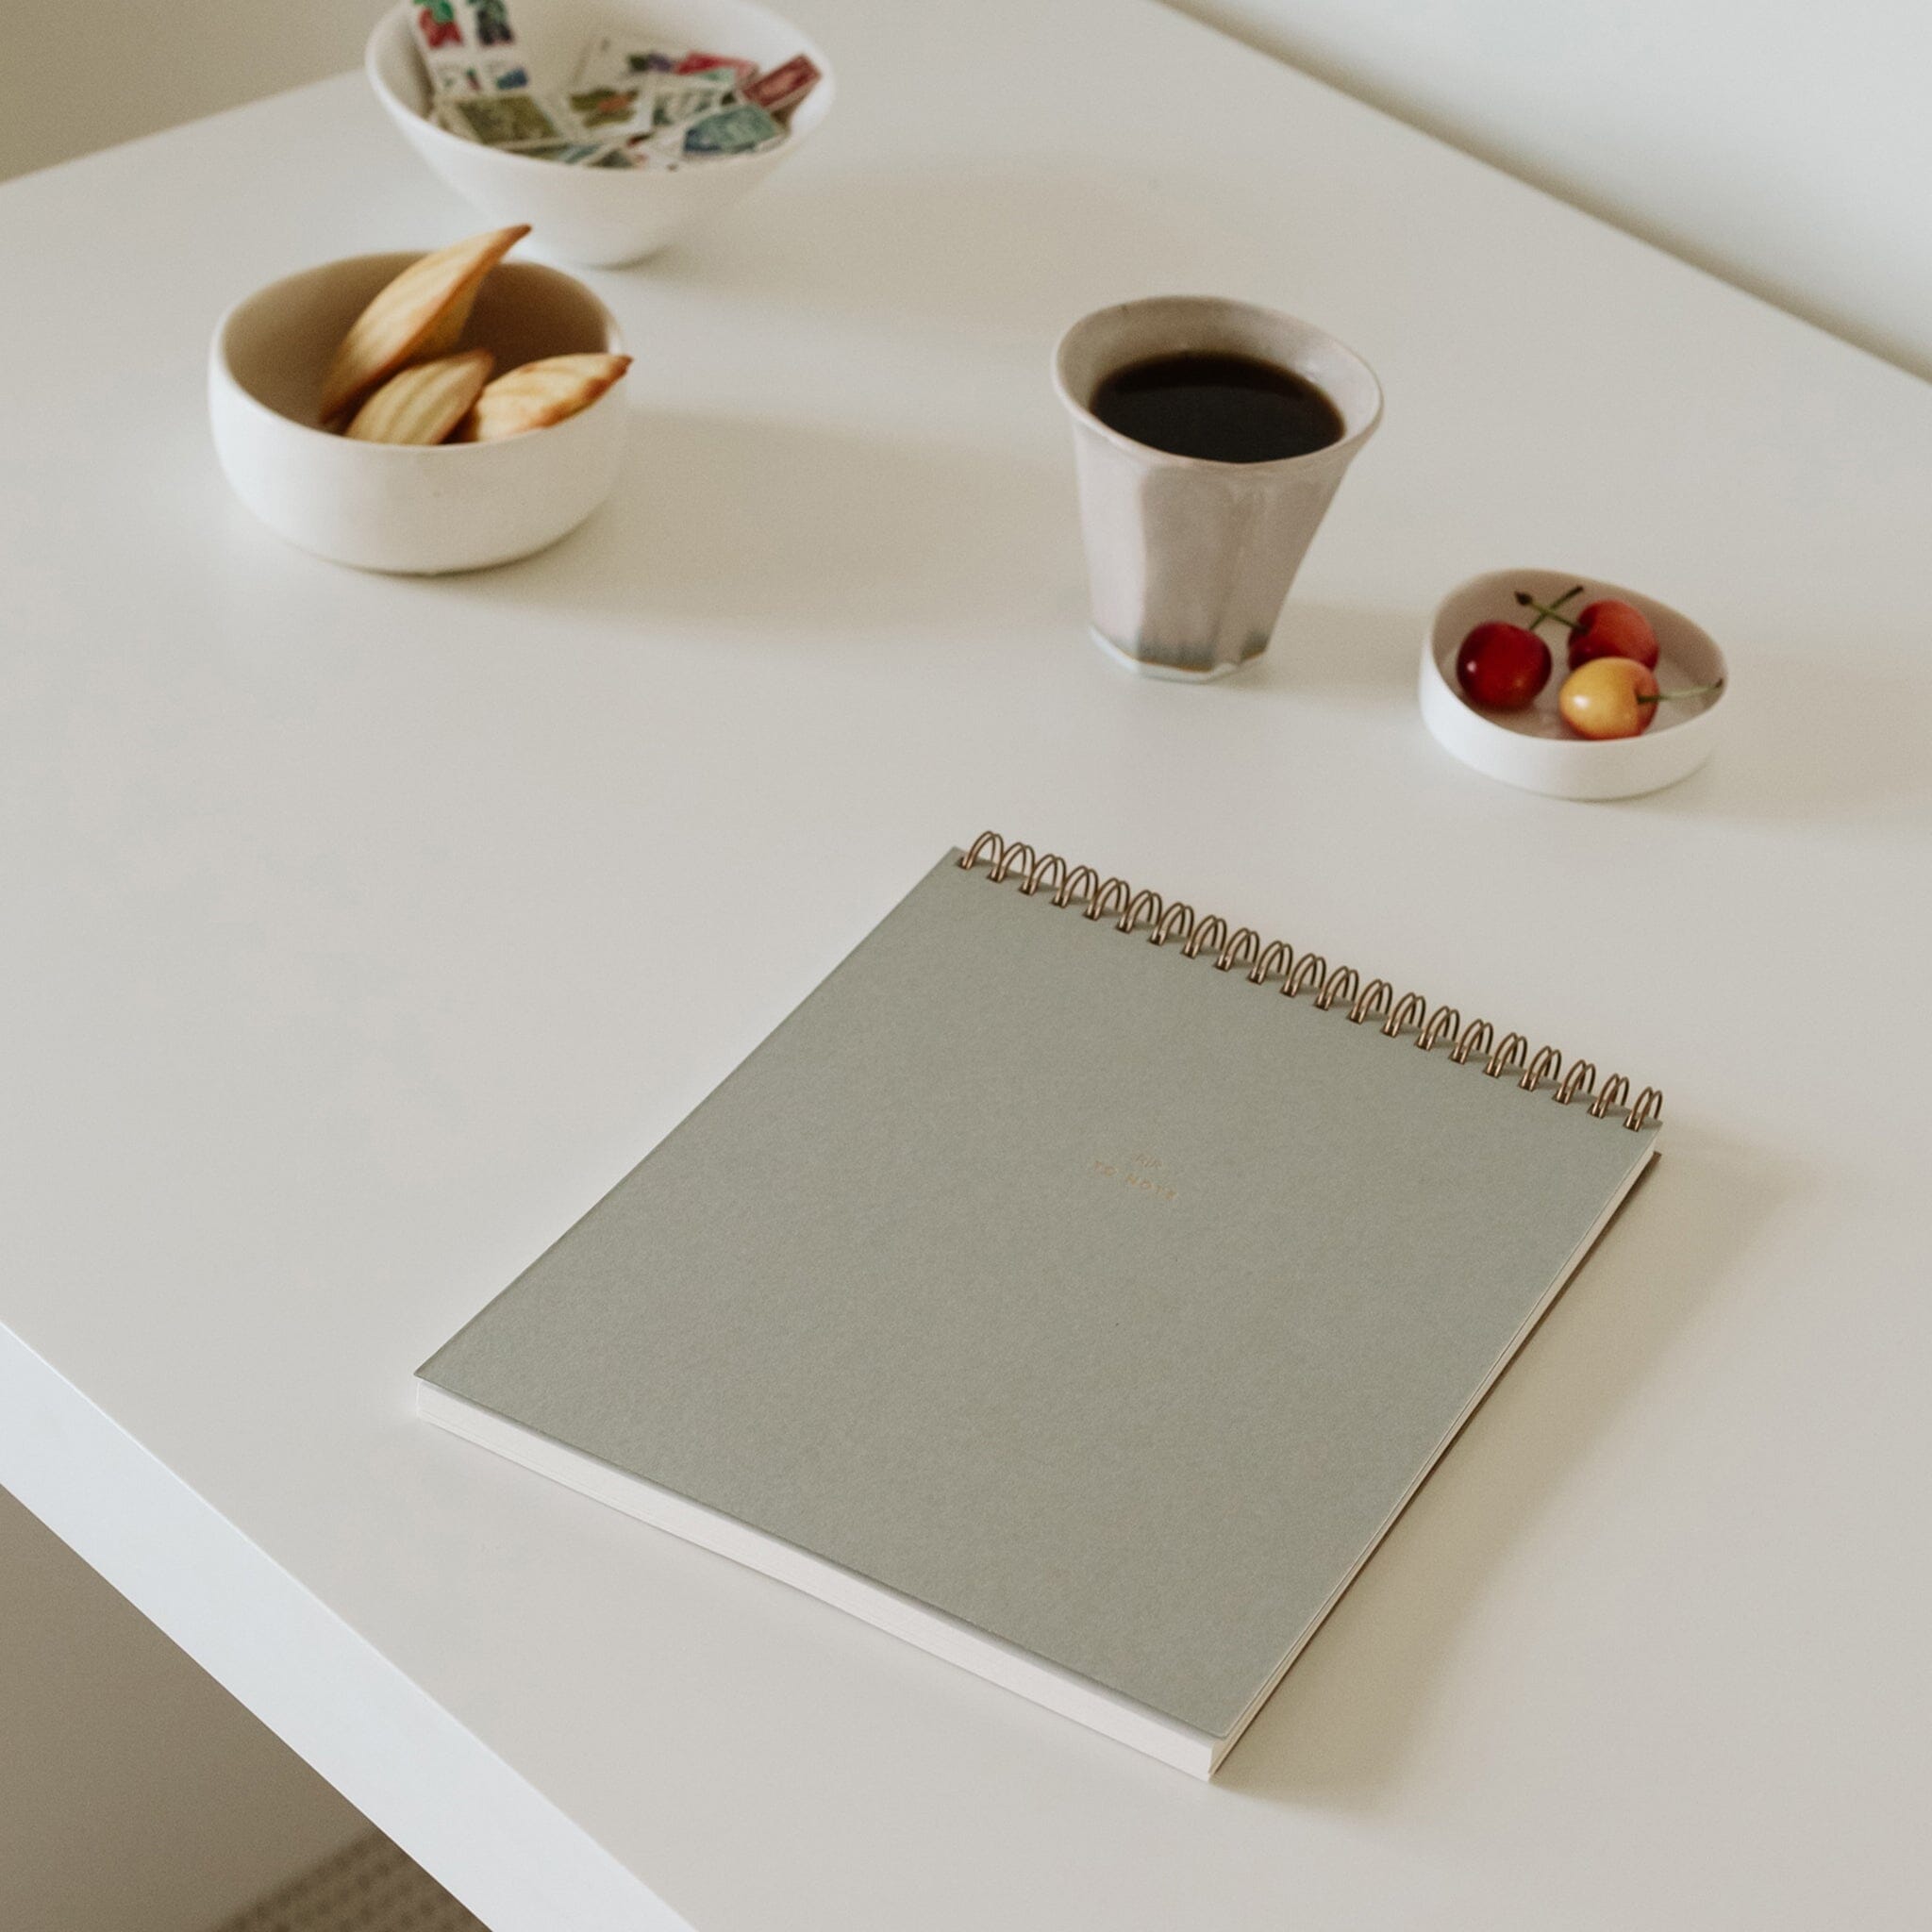 Which Works Best For You: A Notepad or a Notebook?